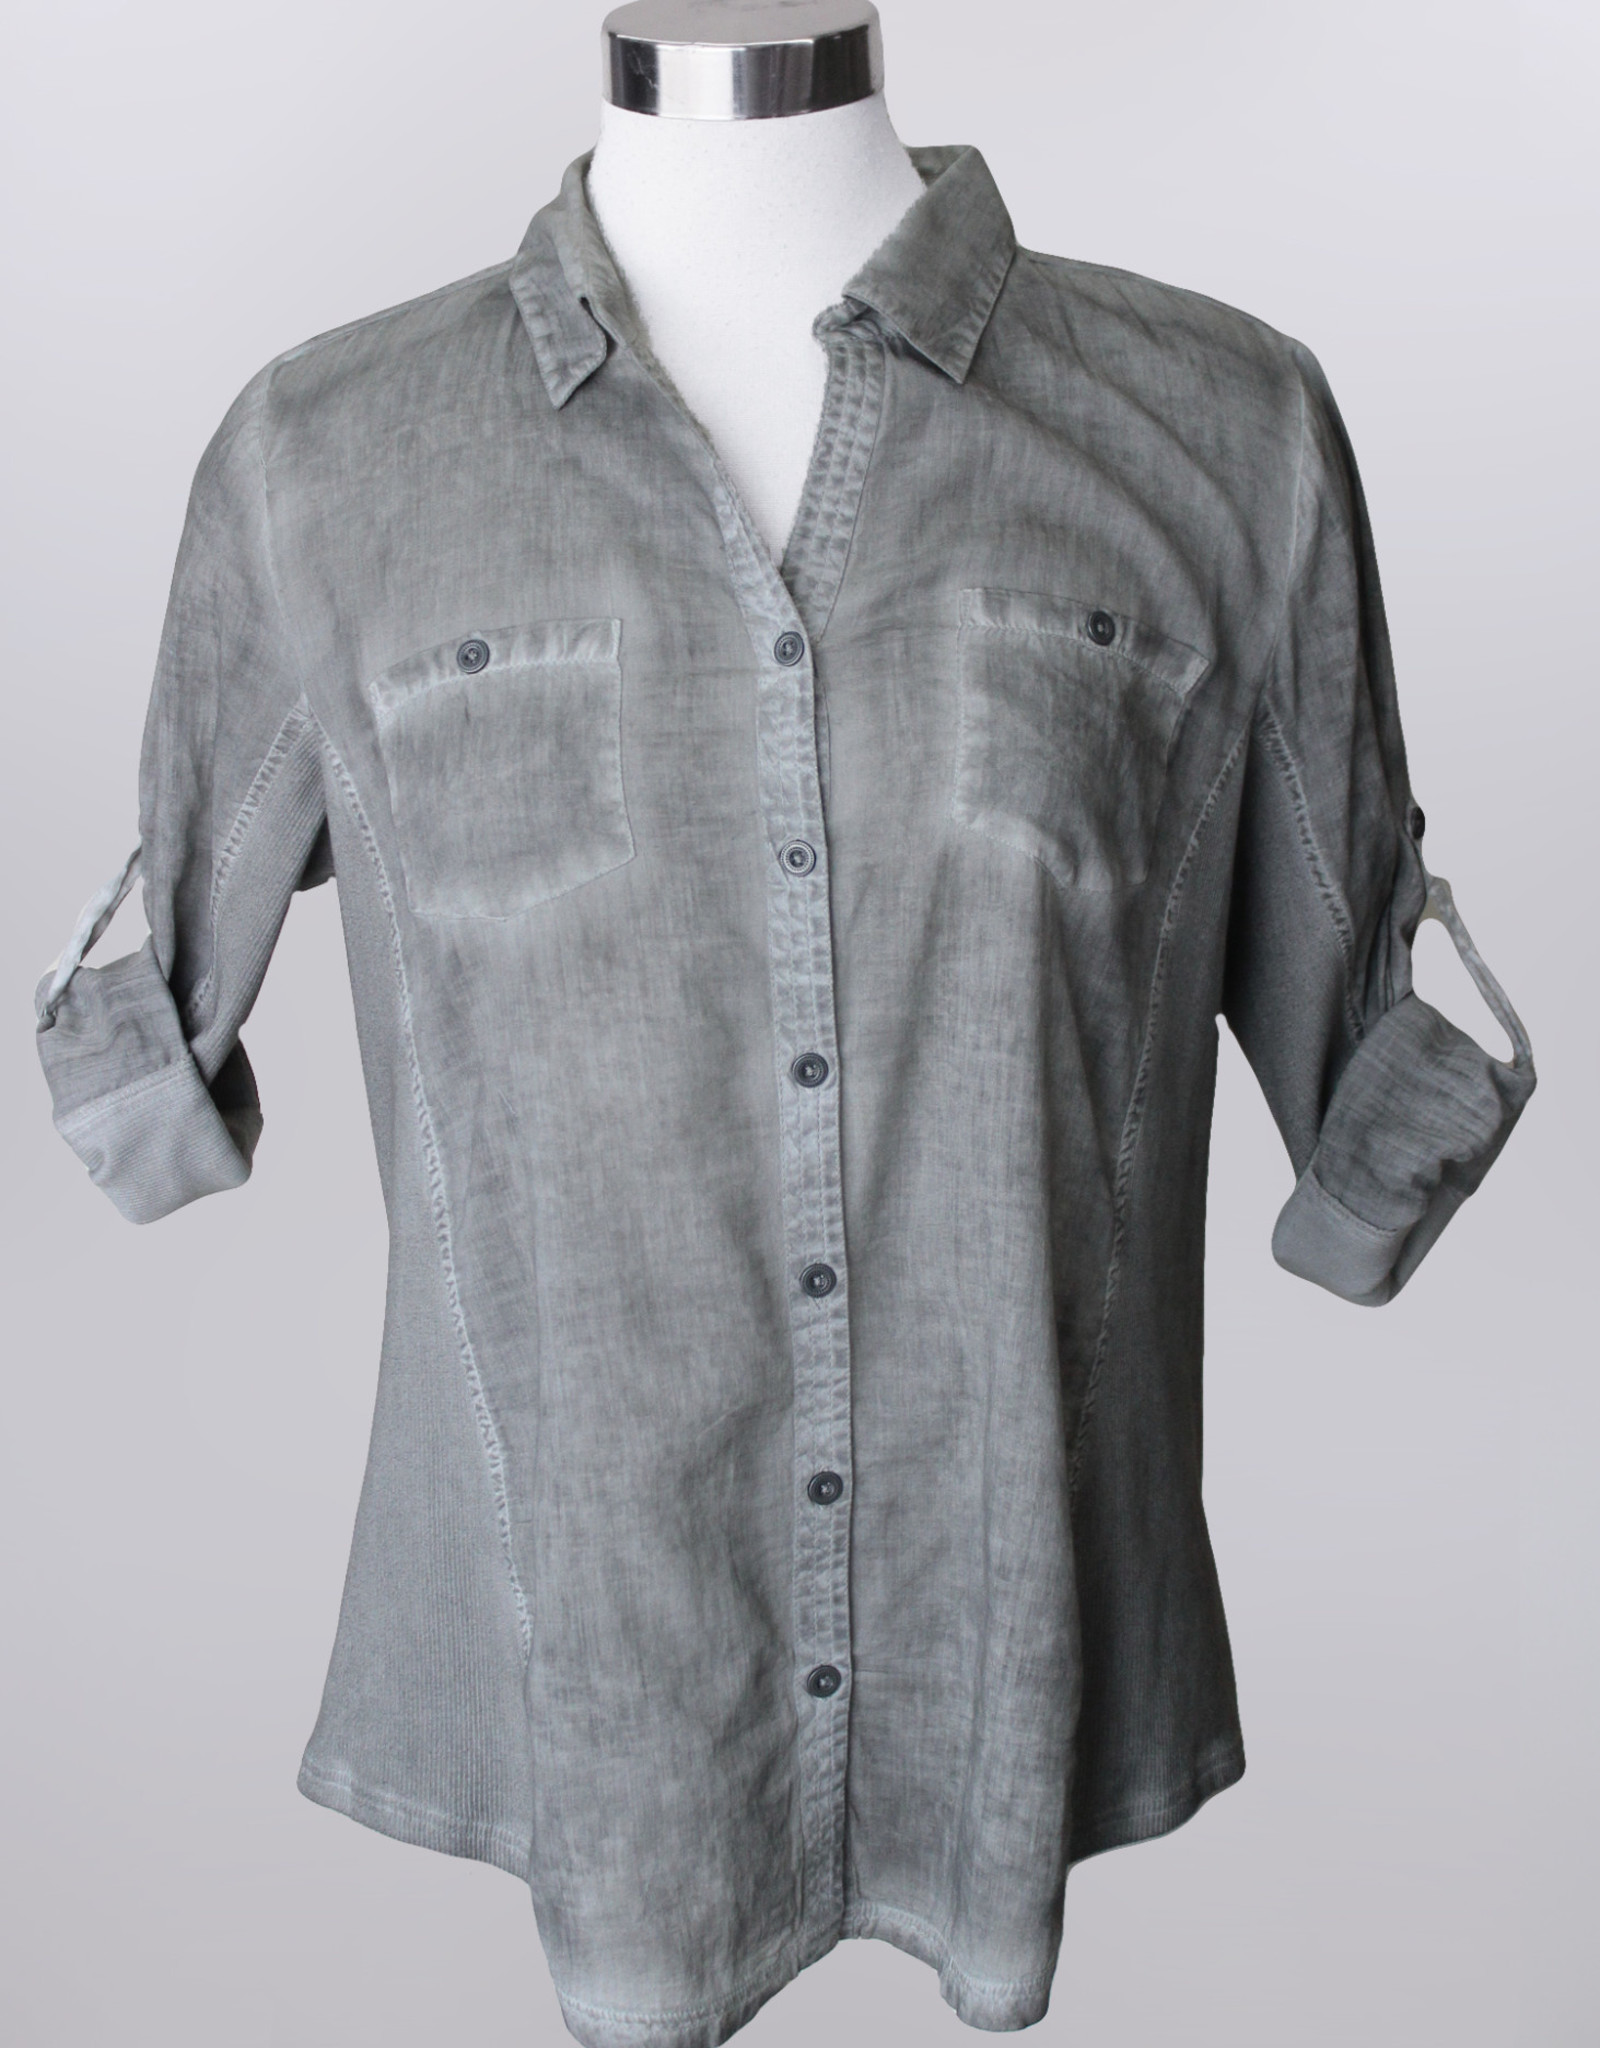 Grey Button-Up 3/4 Sleeve Blouse W/Collar